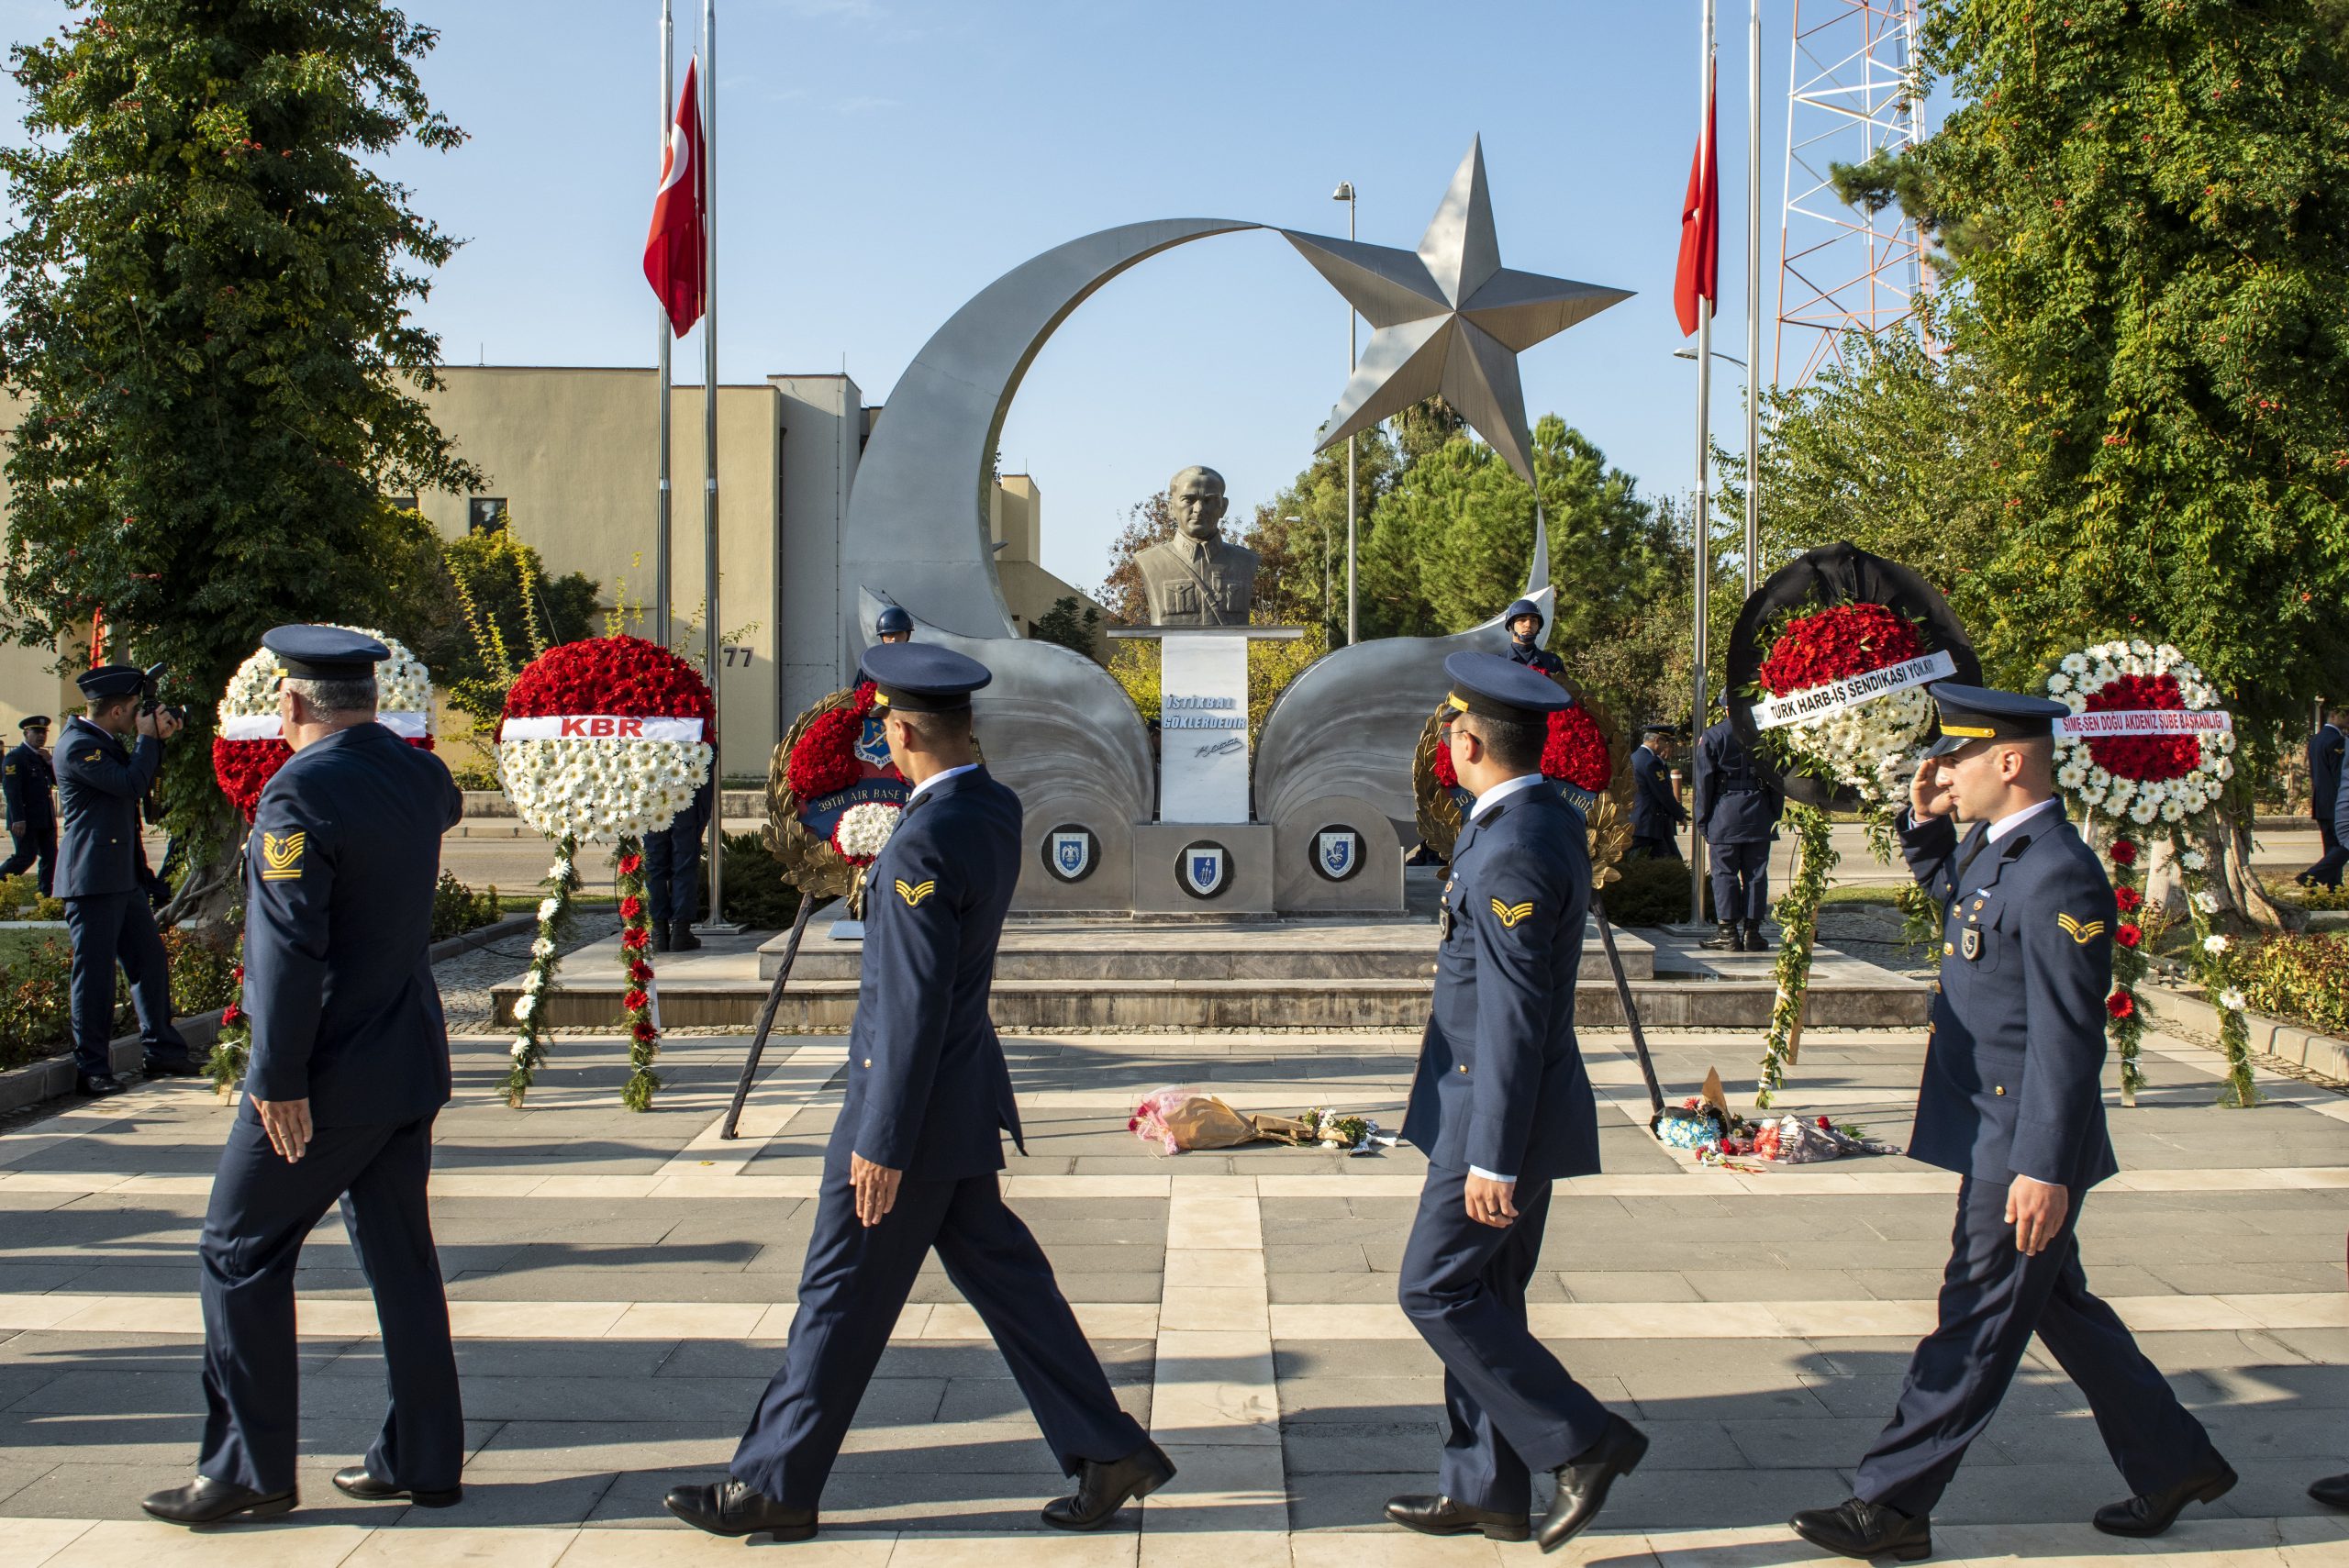 Photo: Turkish Airmen assigned to the 10th Tanker Base Command conclude the ceremony with a final salute to the Atatürk memorial and Turkish flag during the Atatürk Memorial Day ceremony at Incirlik Air Base, Türkiye, Nov. 10, 2022. Credit: Senior Airman David D. McLoney/US Air Force